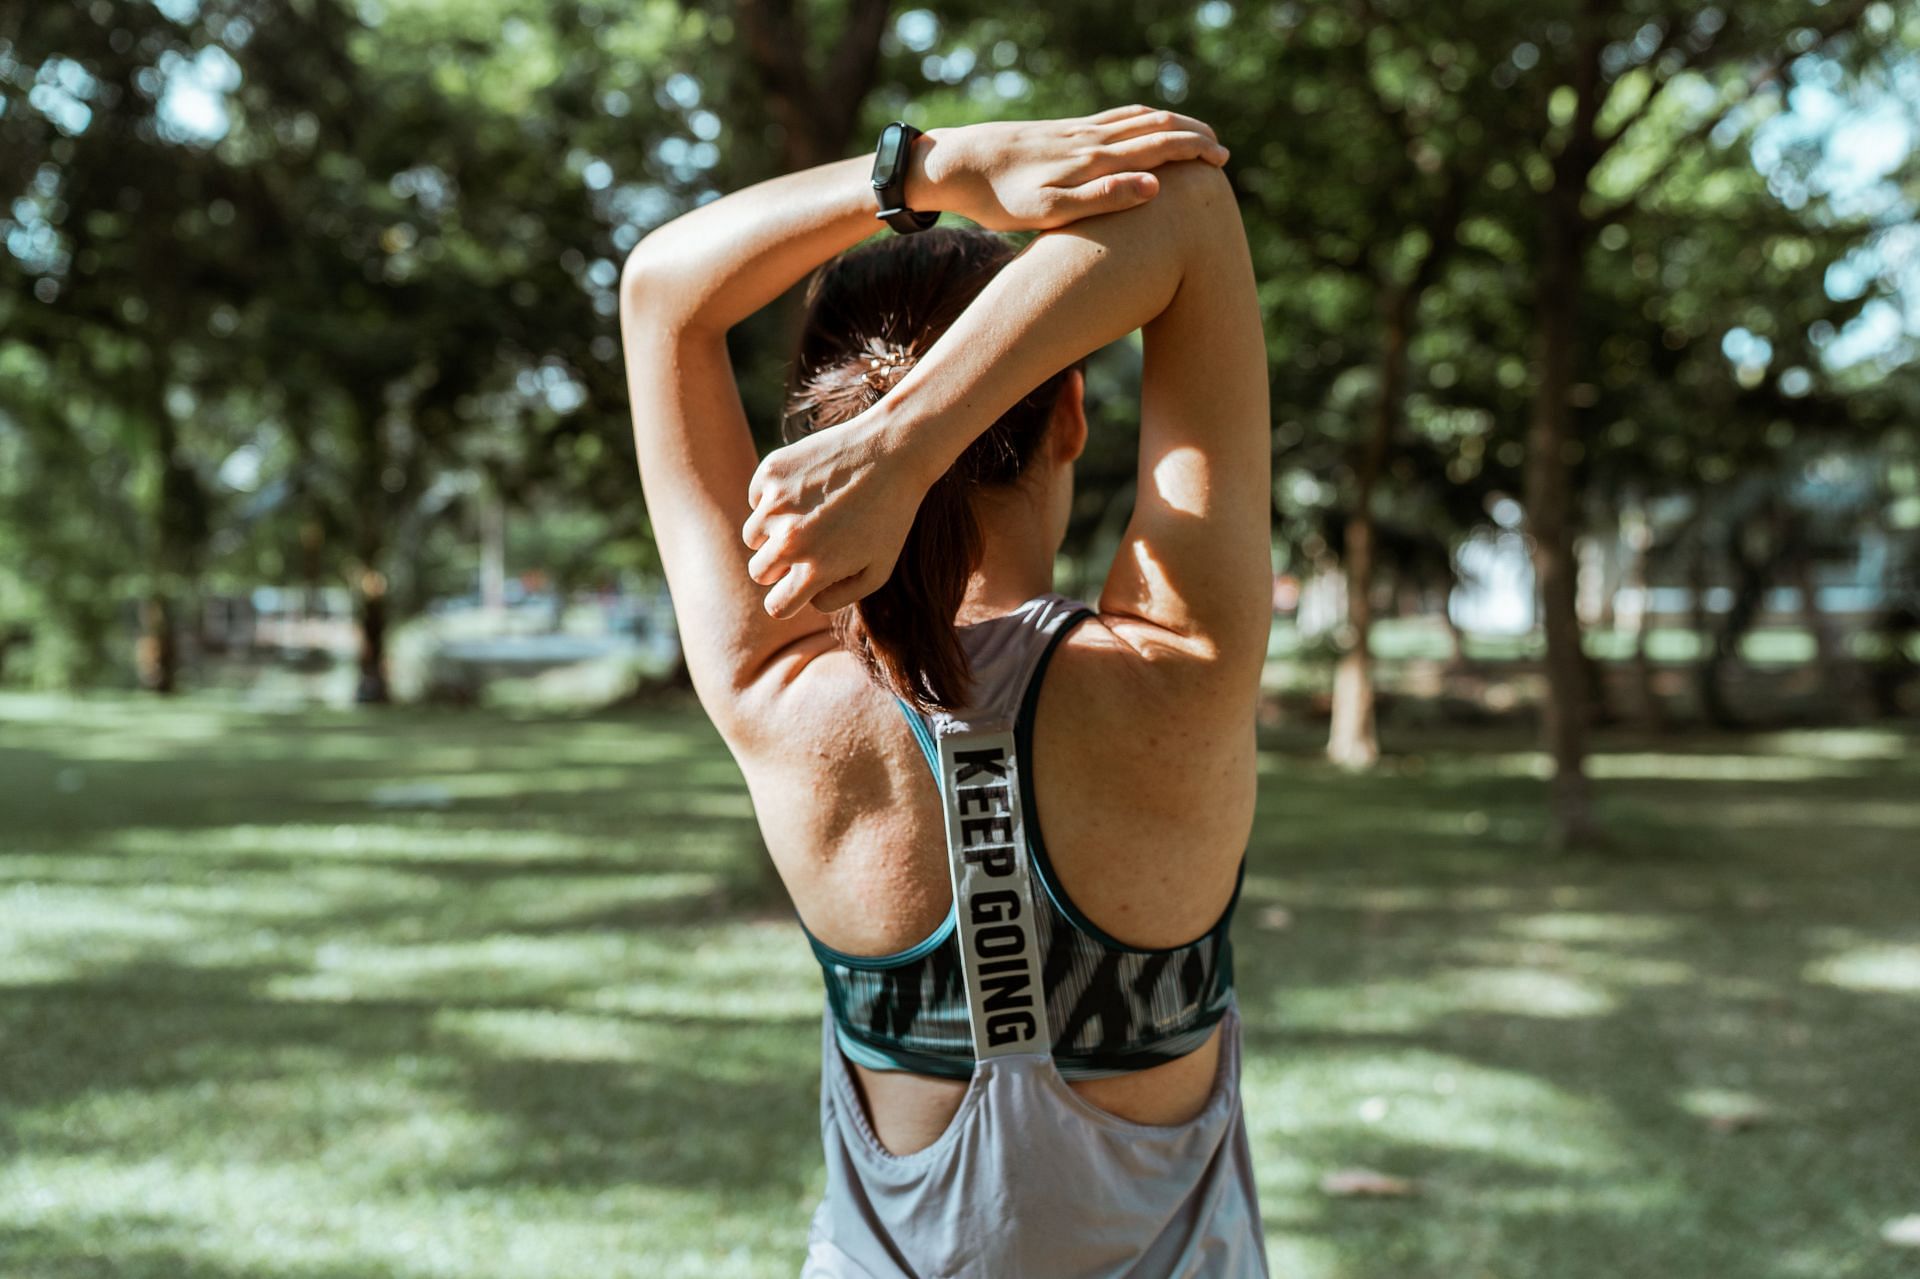 Simple arm stretches can keep serious health issues away. (Image via Pexels/Ketut Subiyanto)